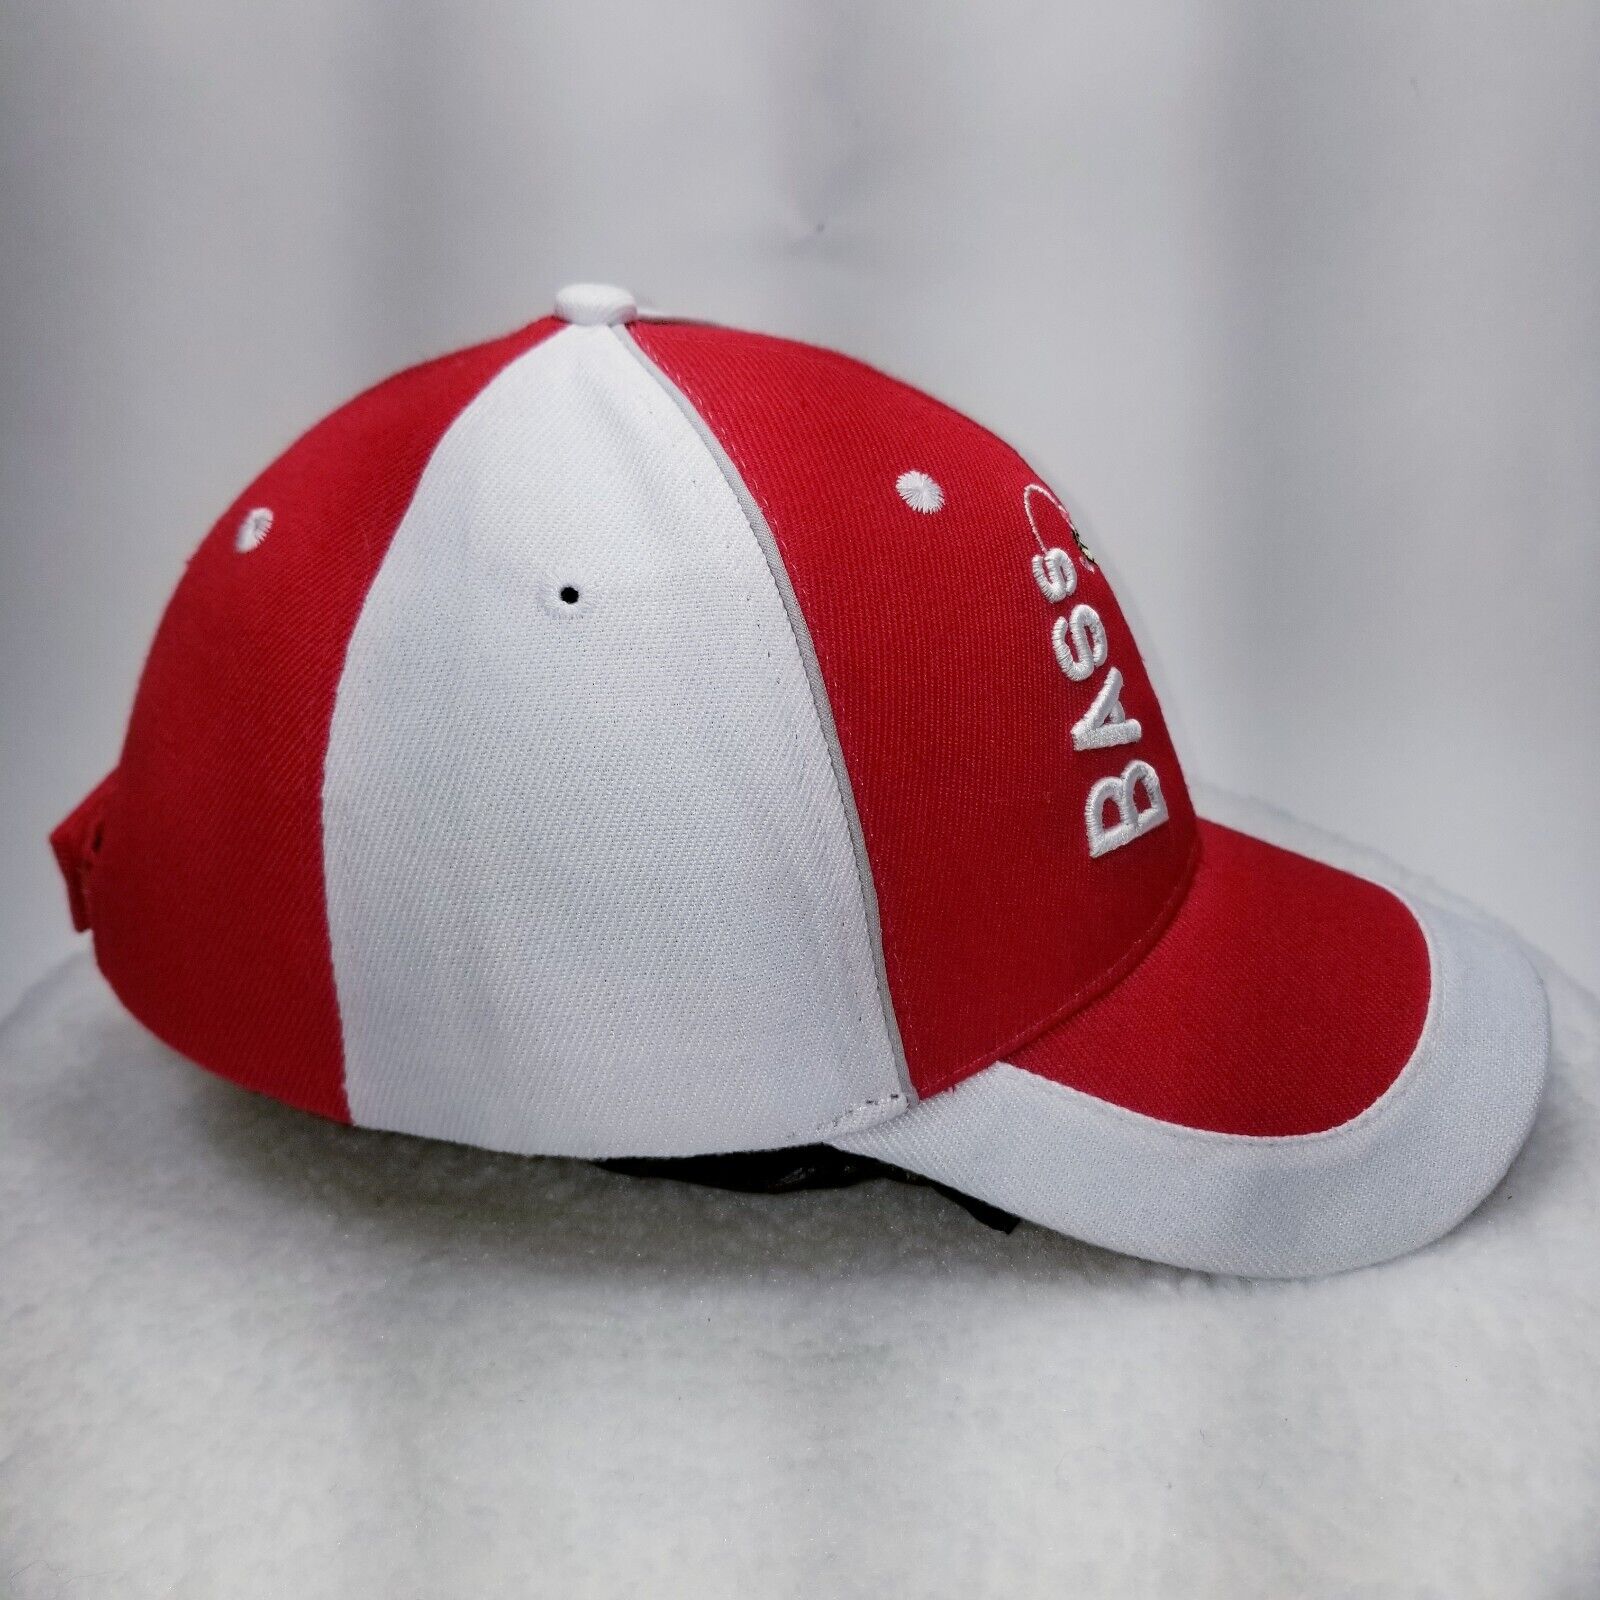 Bass Fishing Hat Baseball Cap Adjustable Red White Large Embroidered Logo  Mens